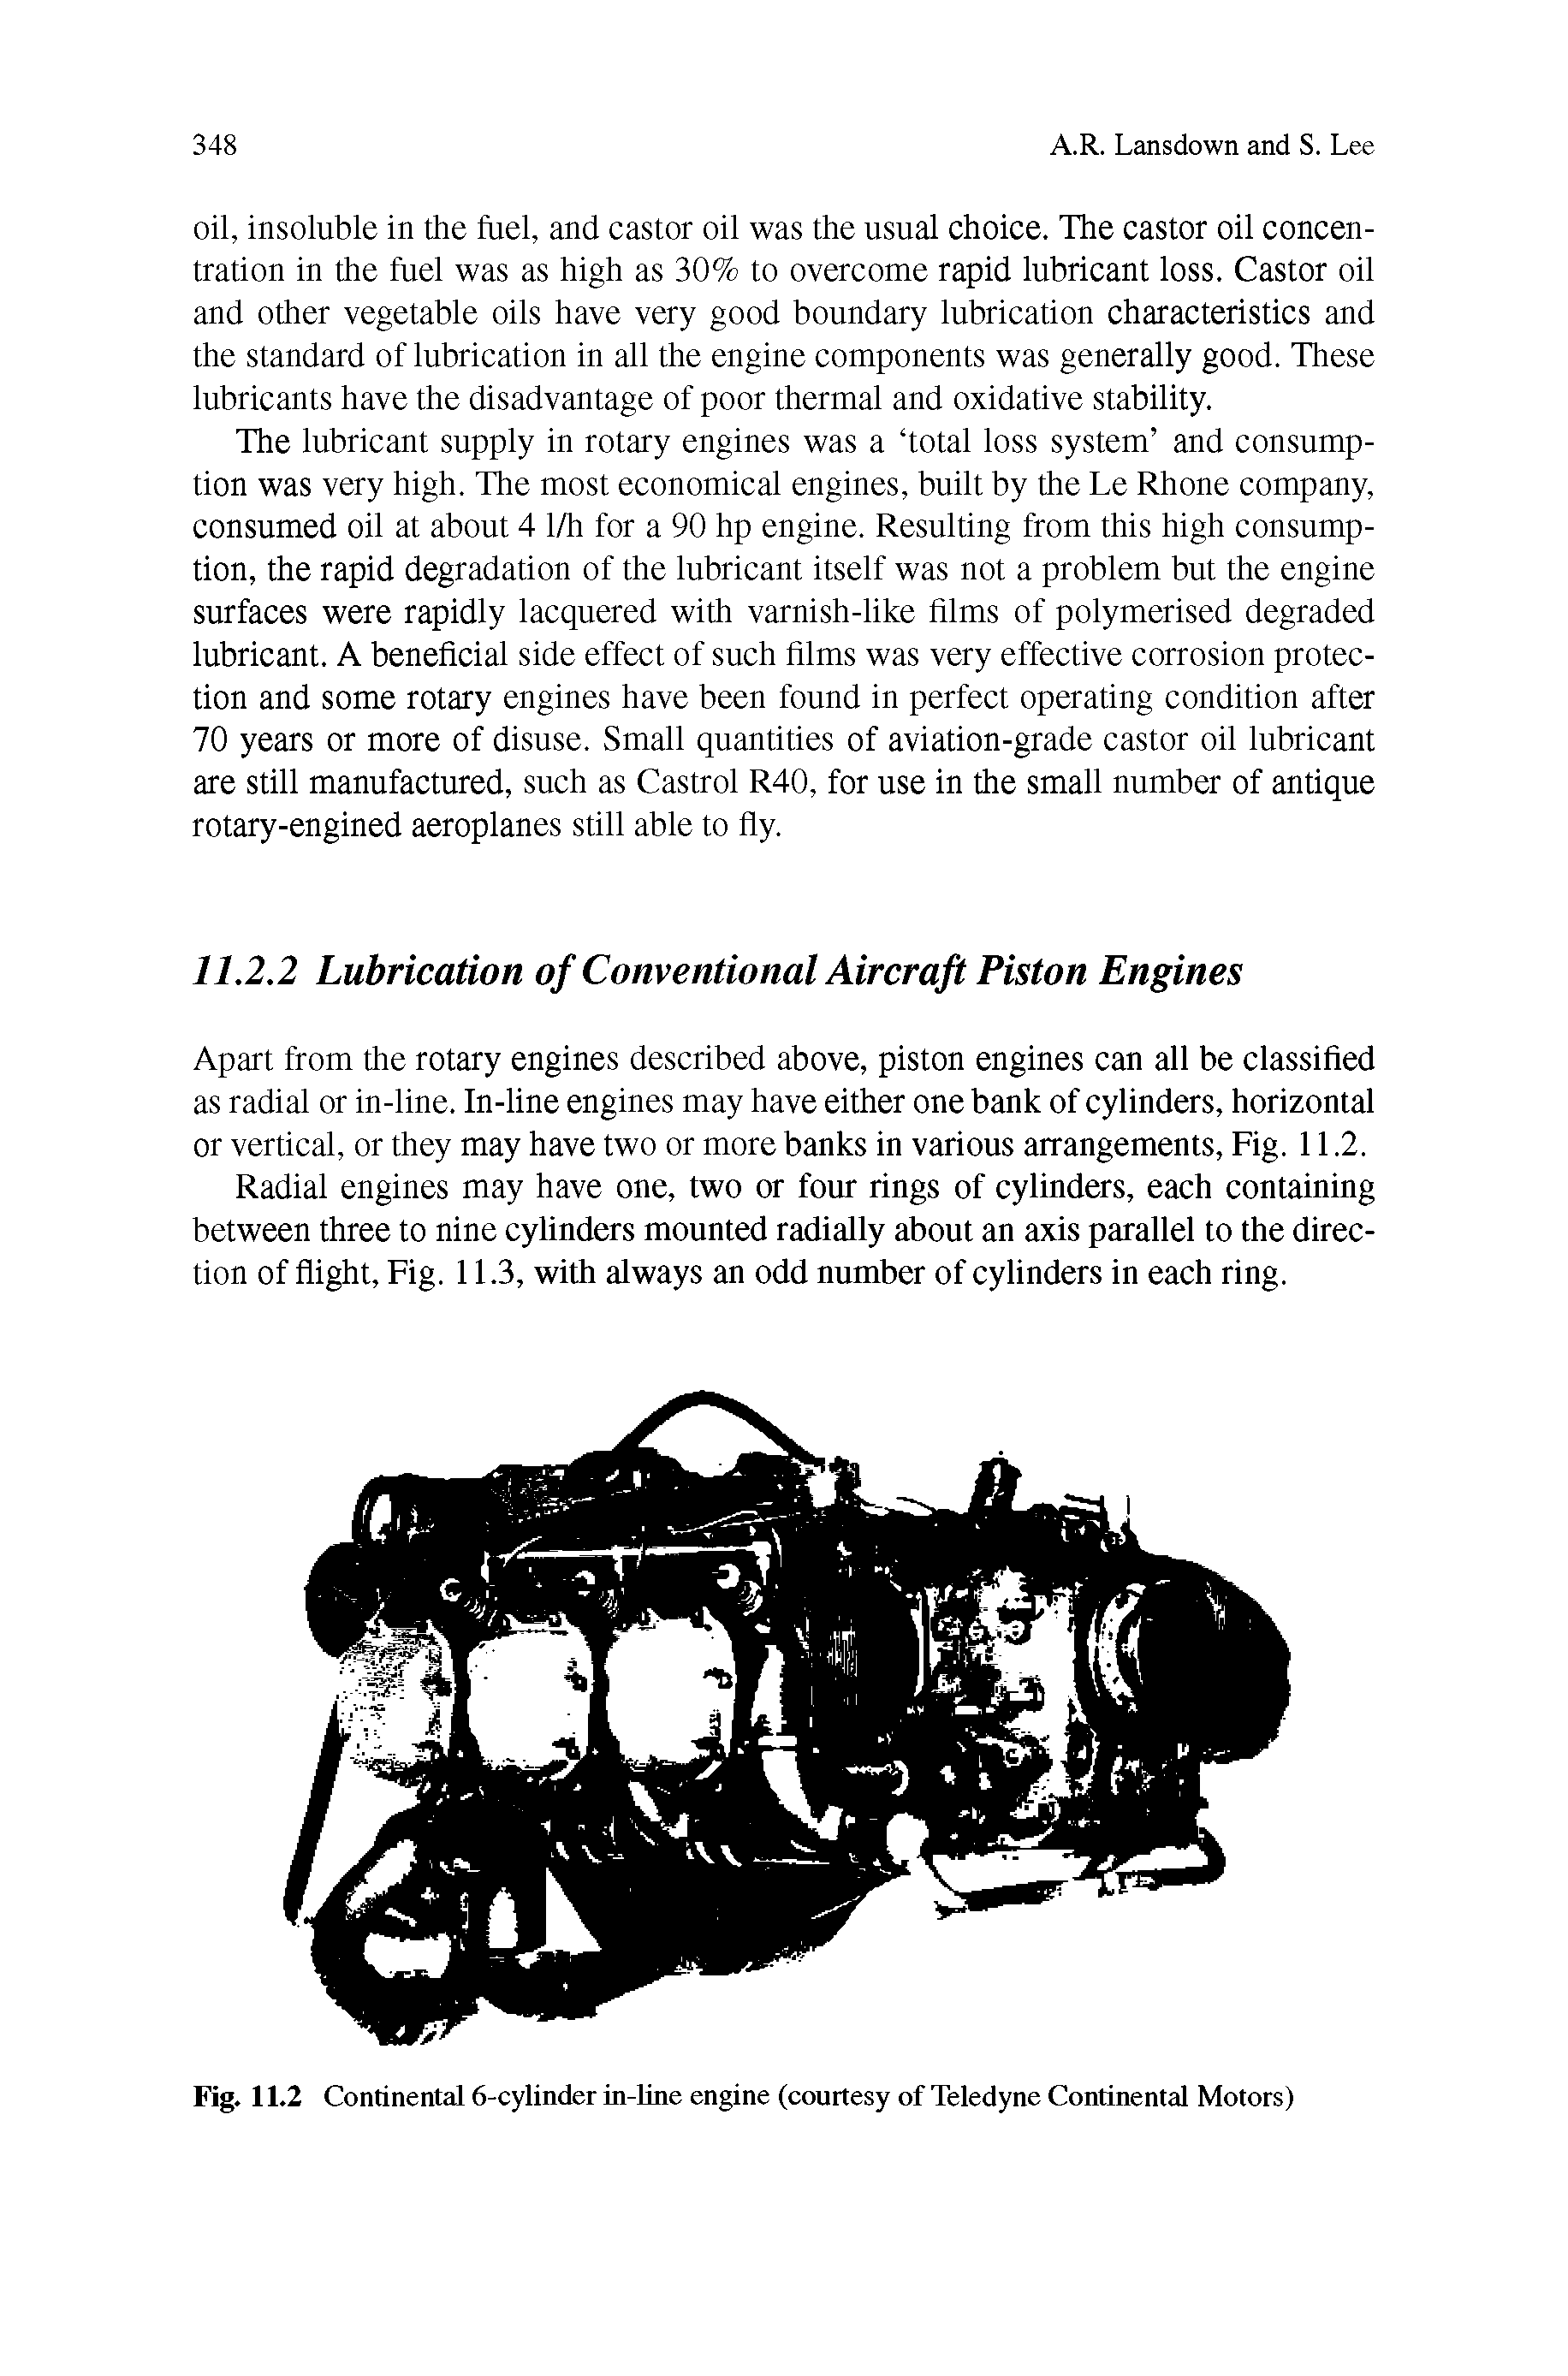 Fig. 11.2 Continental 6-cylinder in-line engine (courtesy of Teledyne Continental Motors)...